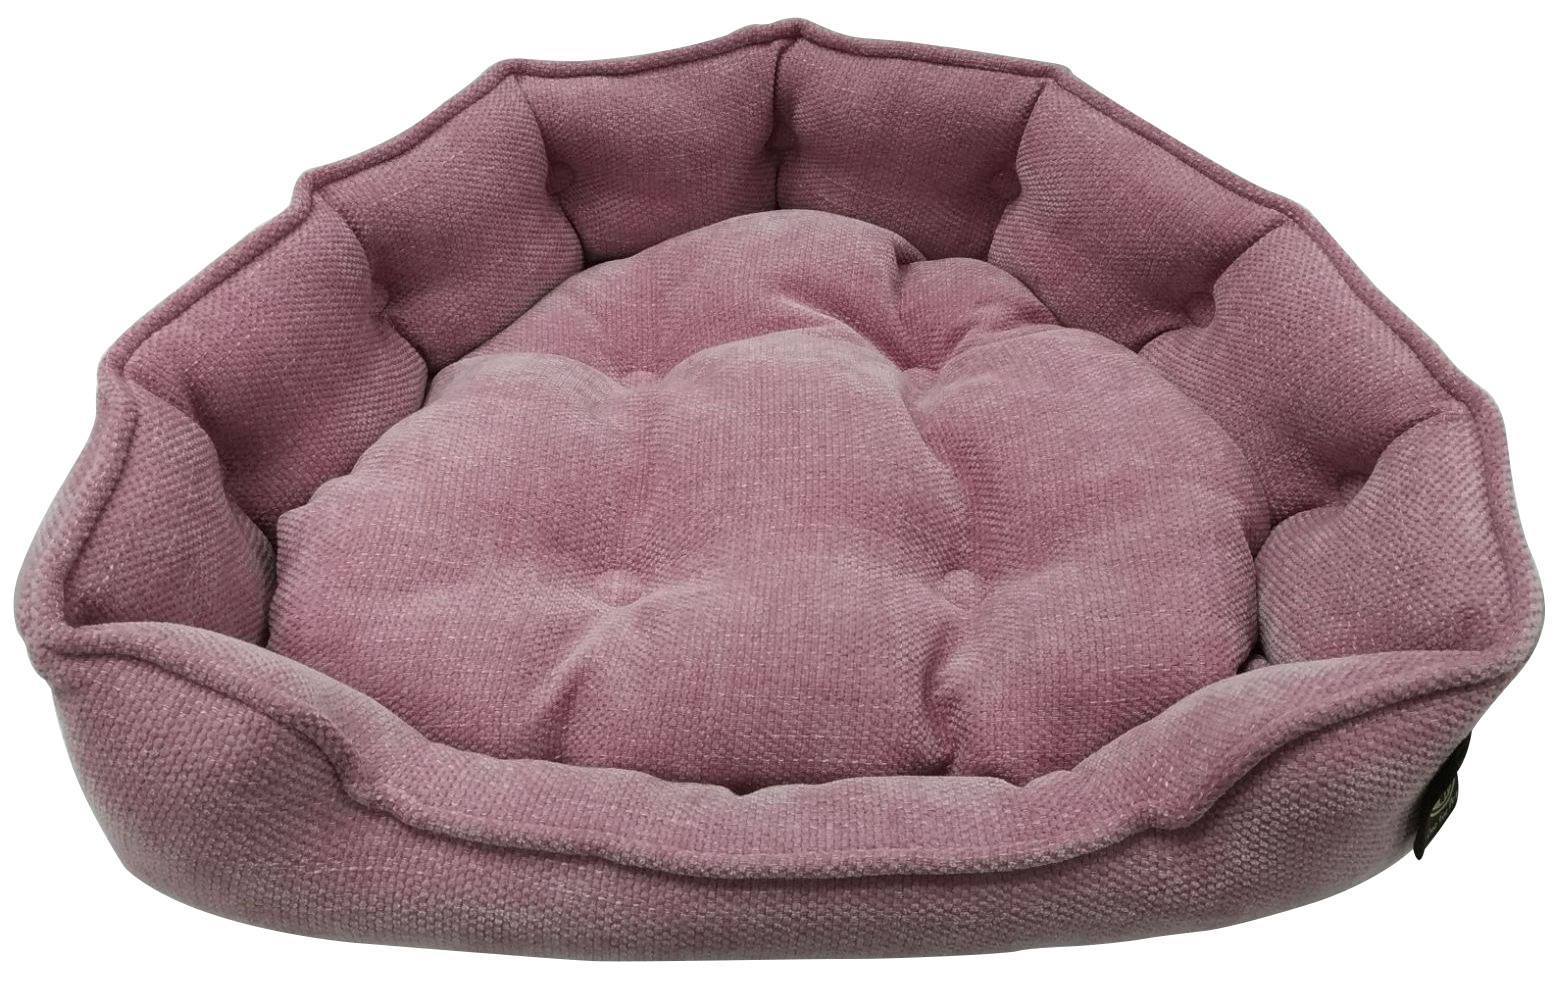 One for Pets - Adela Snuggle Bed - Blushing - 17" x 15" x 5"(XS) - PetProject.HK